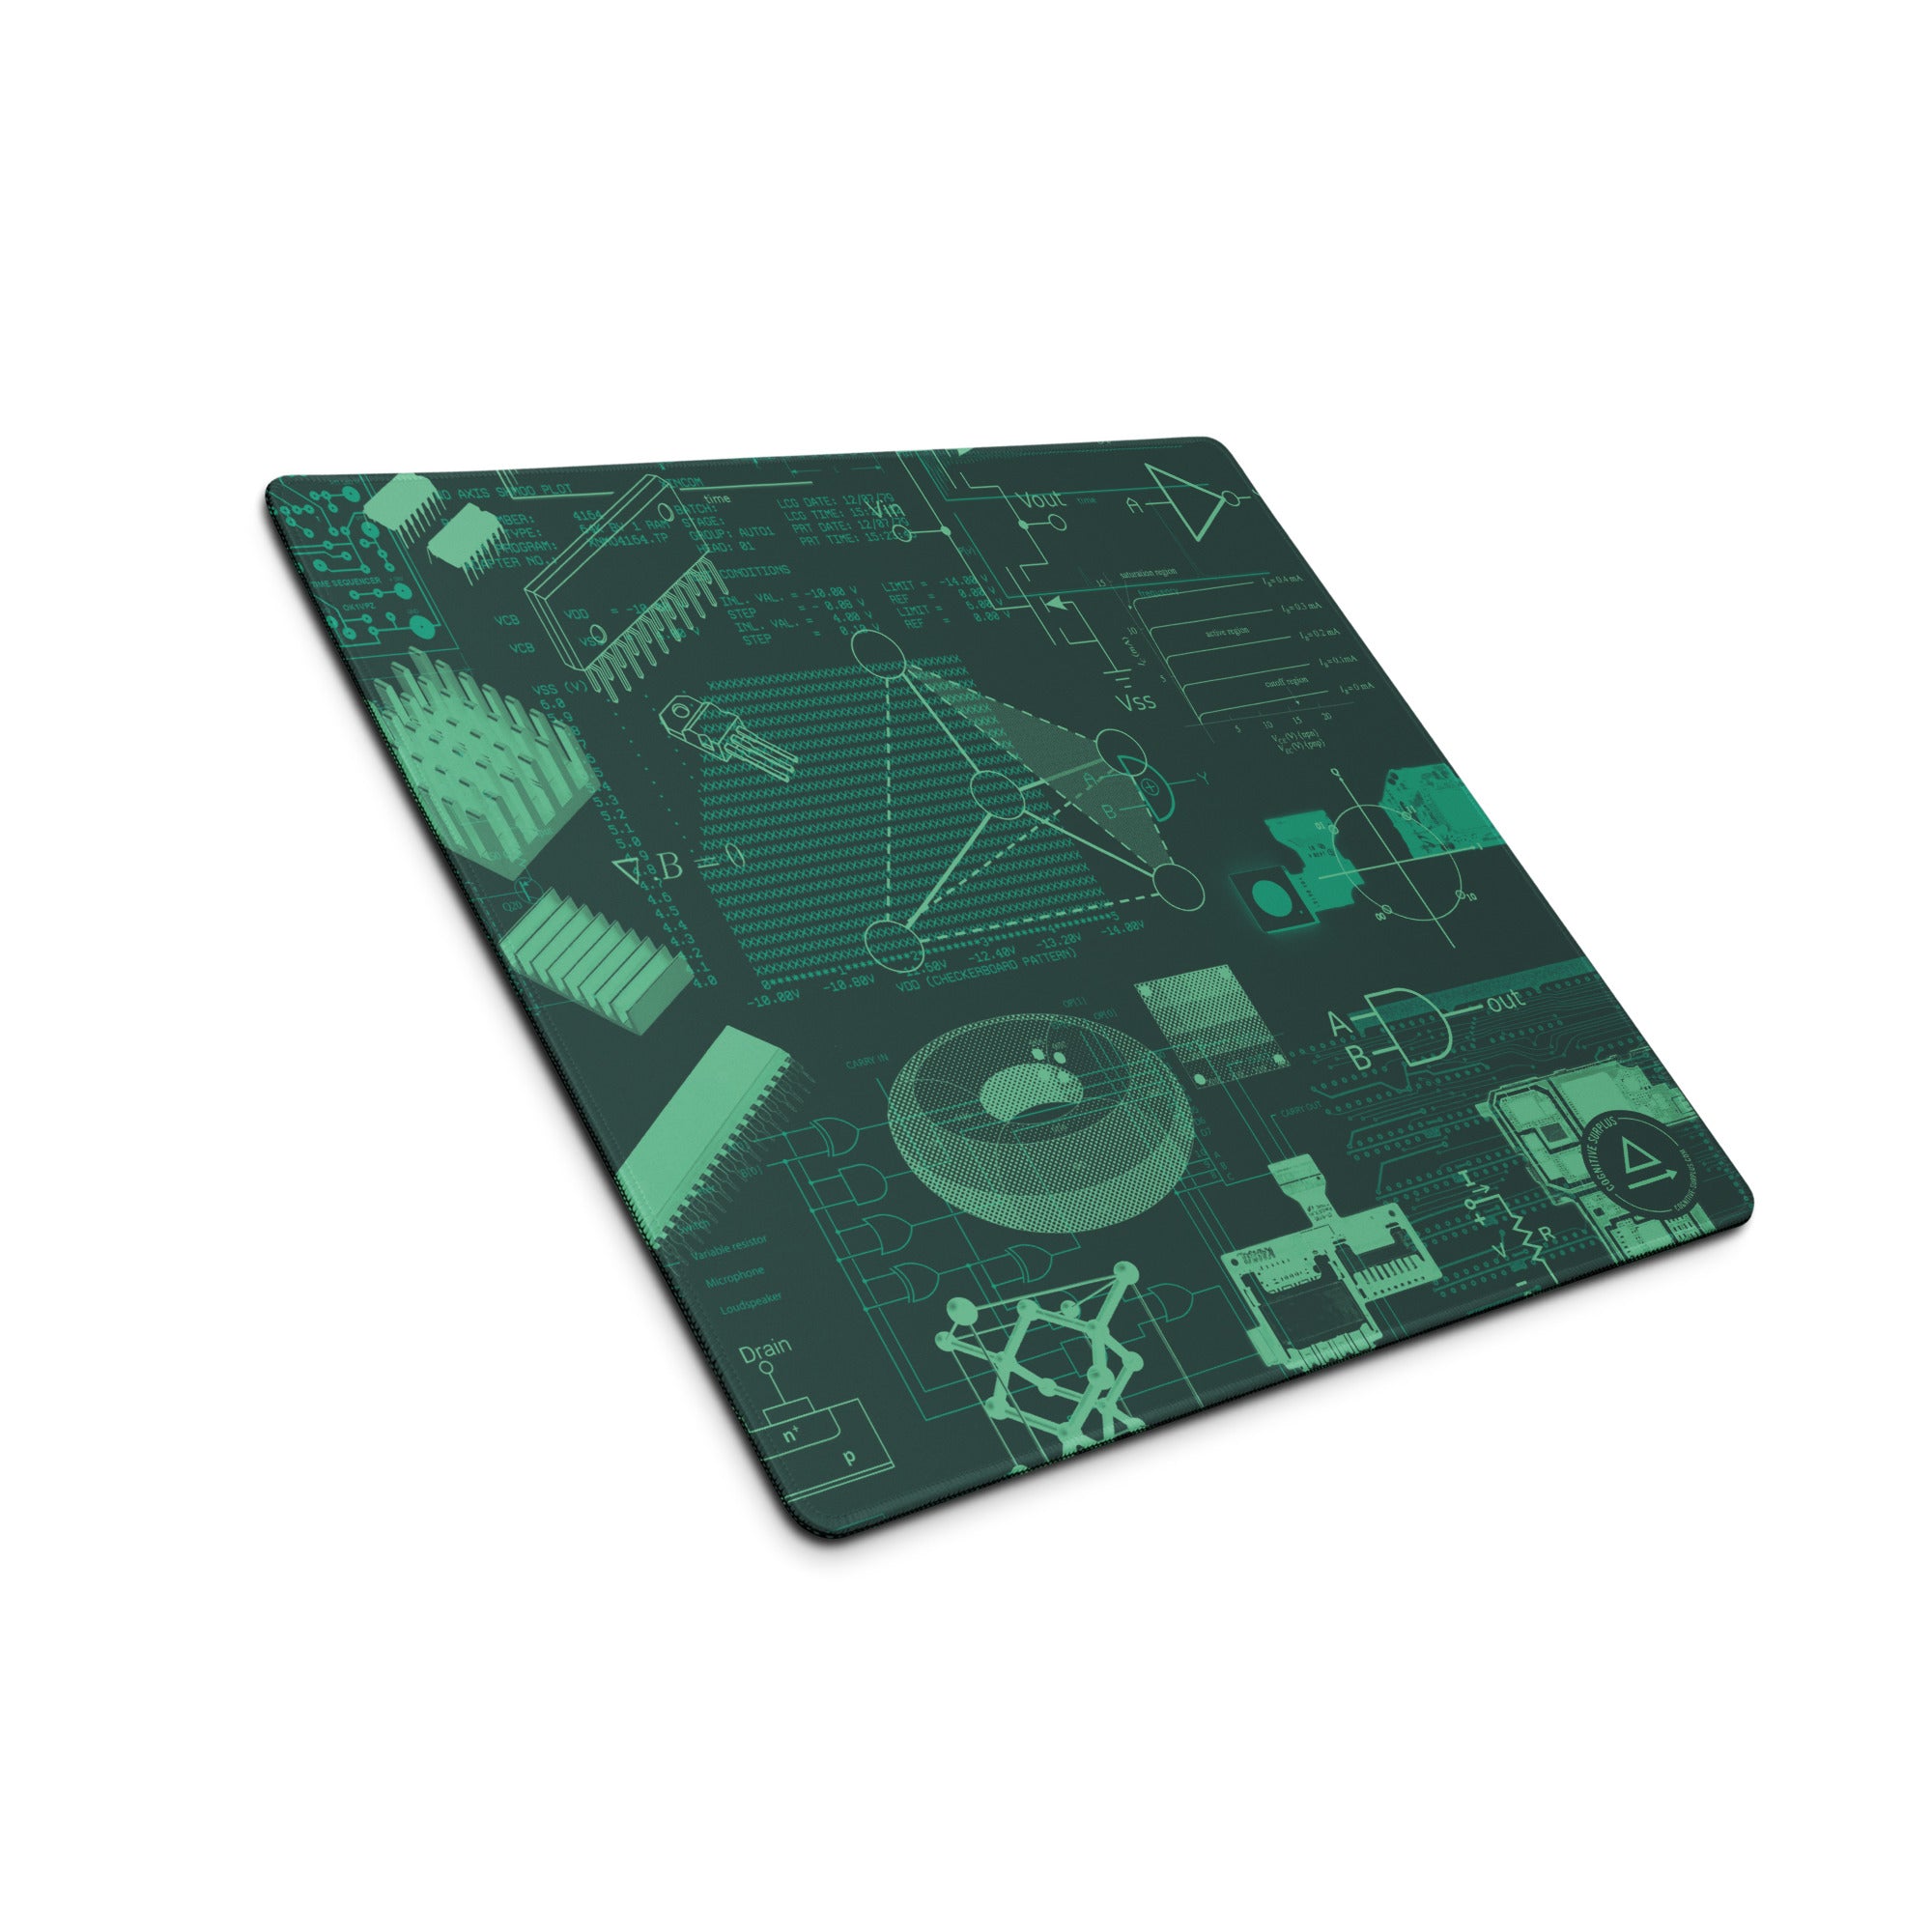 gaming-mouse-pad-white-18x16-front-6595e655aff71.jpg